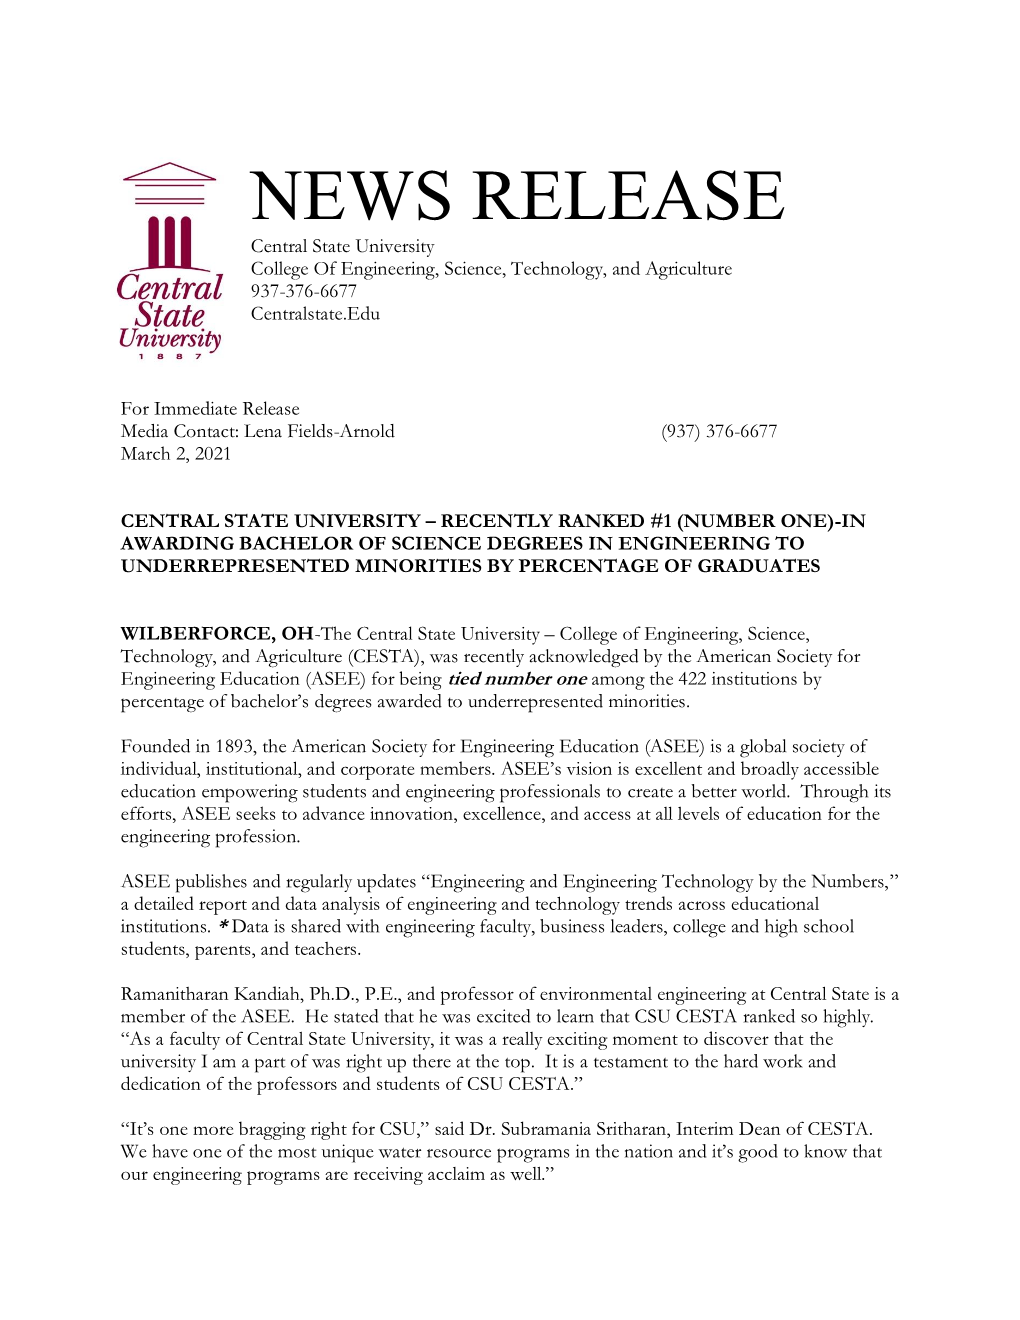 NEWS RELEASE Central State University College of Engineering, Science, Technology, and Agriculture 937-376-6677 Centralstate.Edu